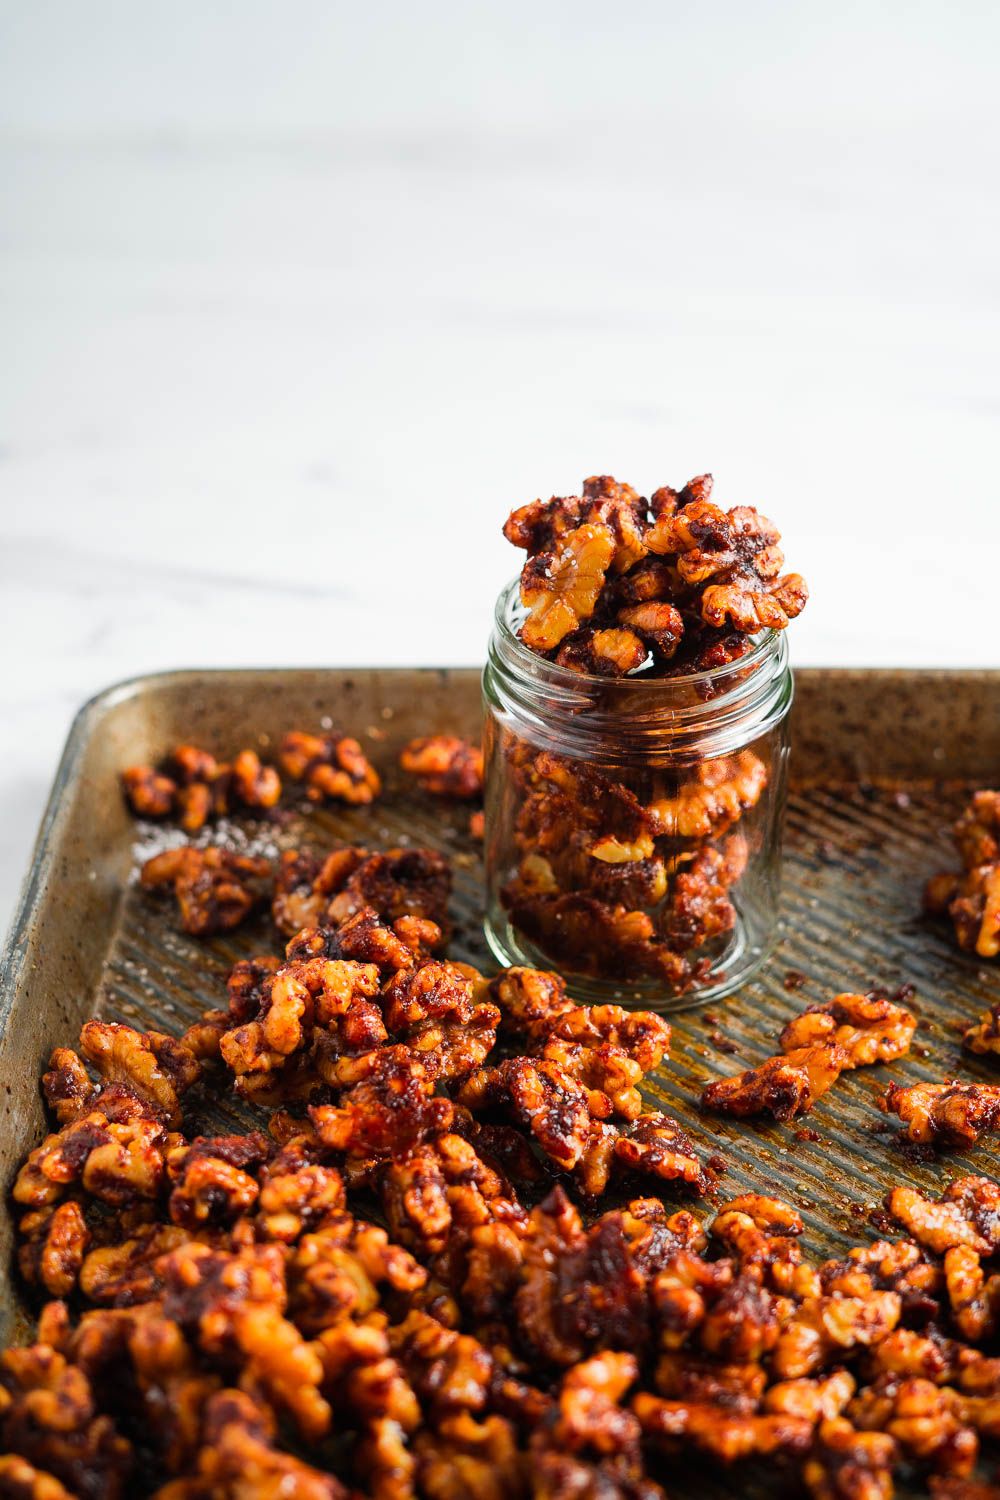 Keto Moroccan Sweet and Spicy Walnuts